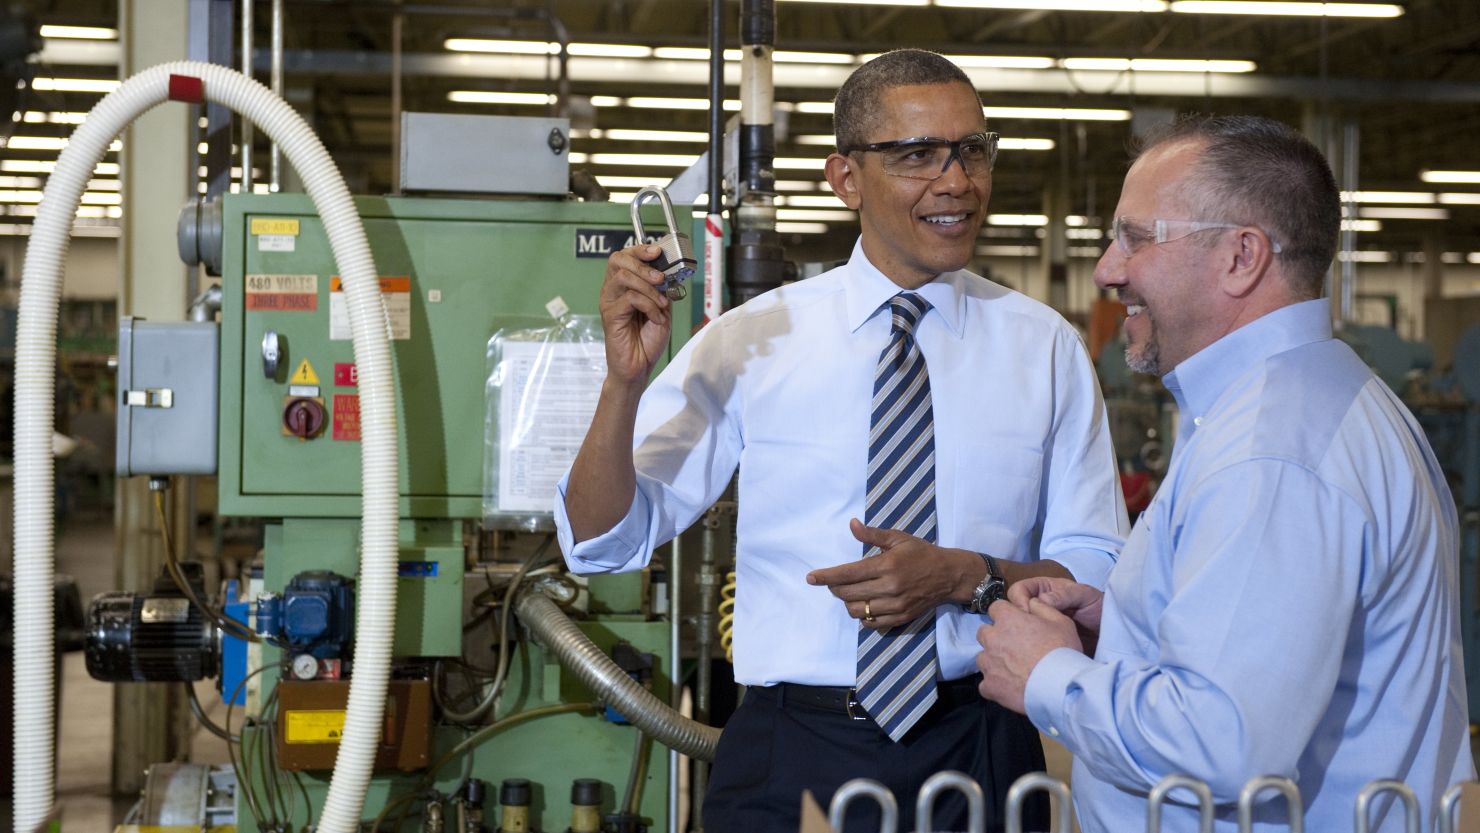 President Obama visits a Master Lock factory.  Jeffrey Bergstand says manufacturing's heyday is over in the United States.